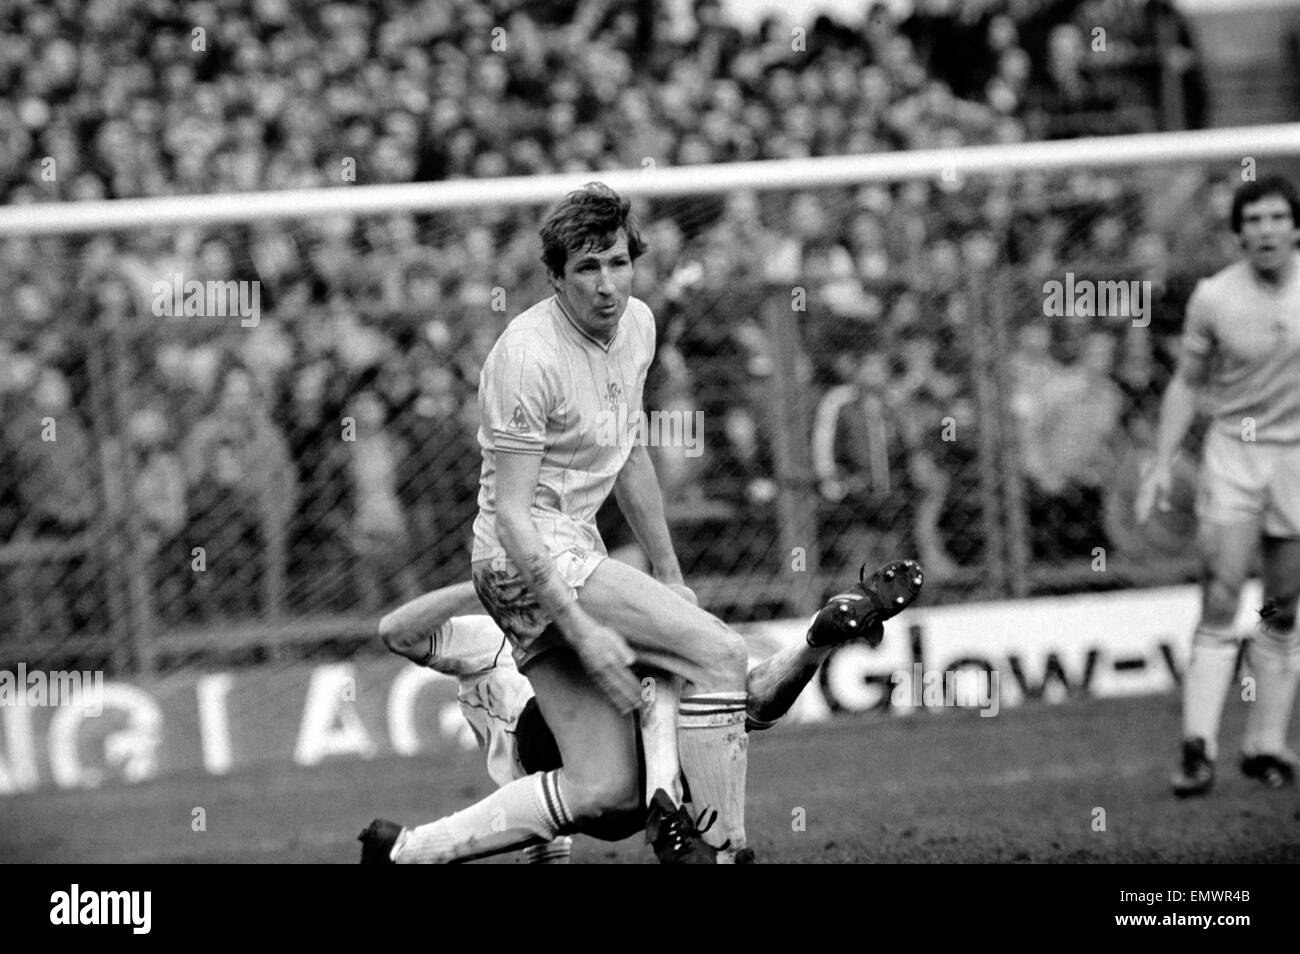 FA Cup match at the Baseball Ground. Derby County v. Chelsea. Action from the match. January 1983. Stock Photo